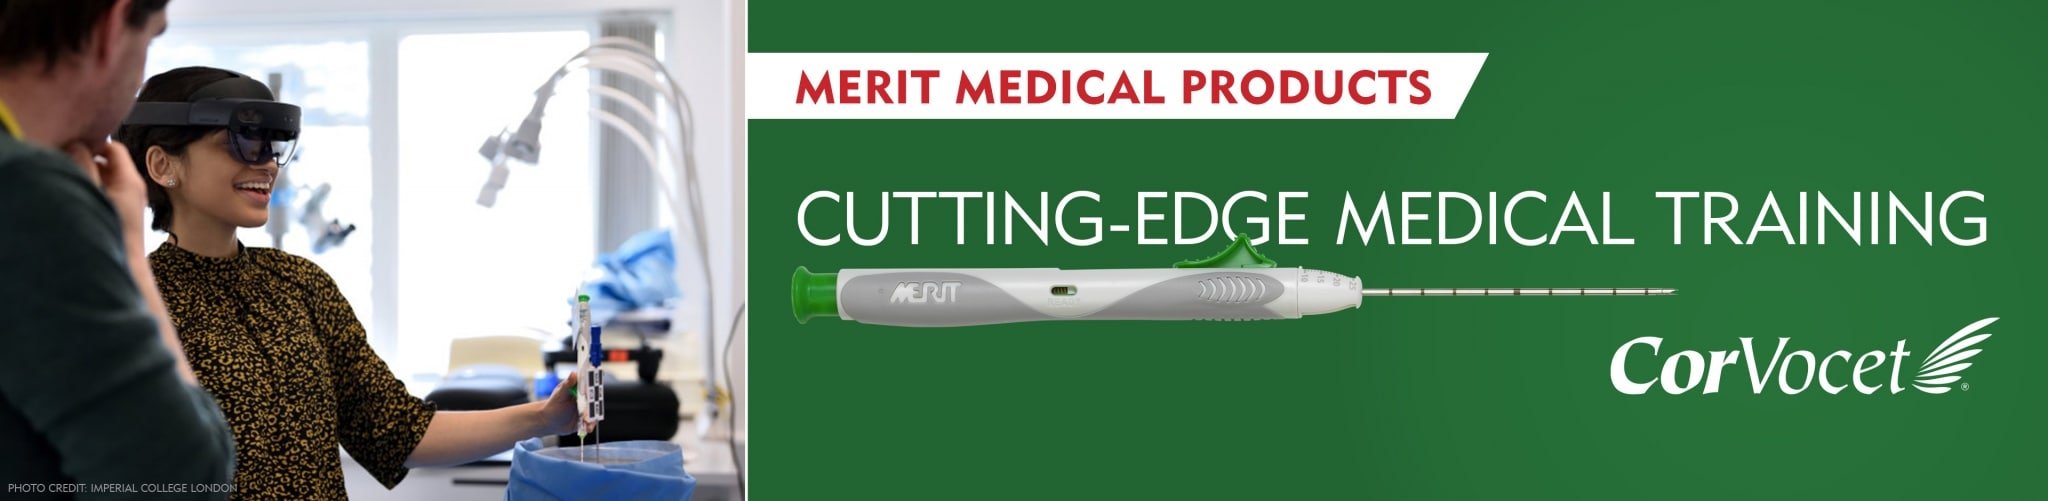 Merit Medical Products Support Cutting-Edge Medical Training V2